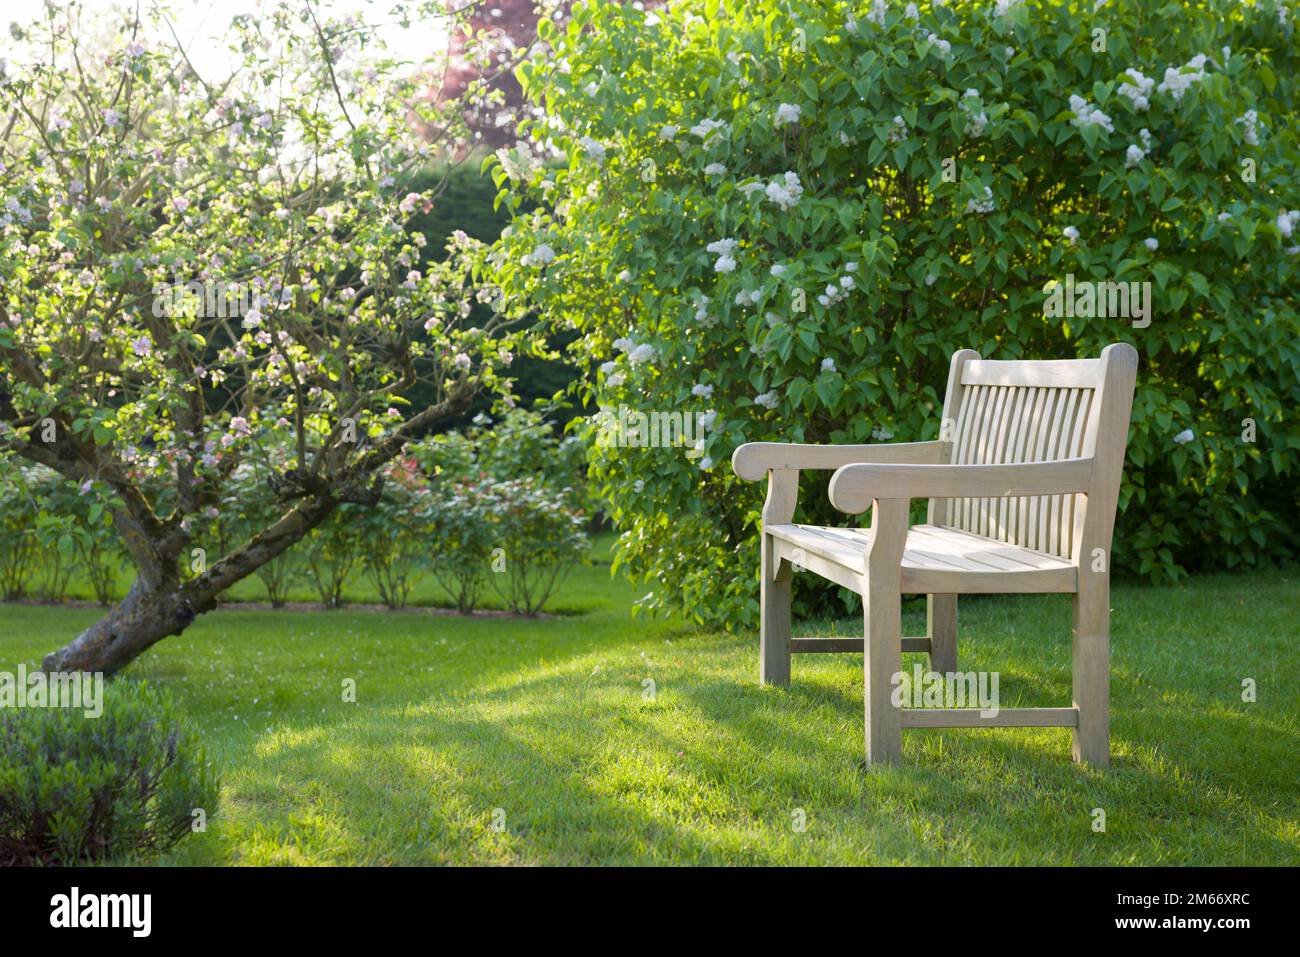 Teak garden bench on lawn in a UK garden in spring, with apple and lilac trees in blossom Stock Photo